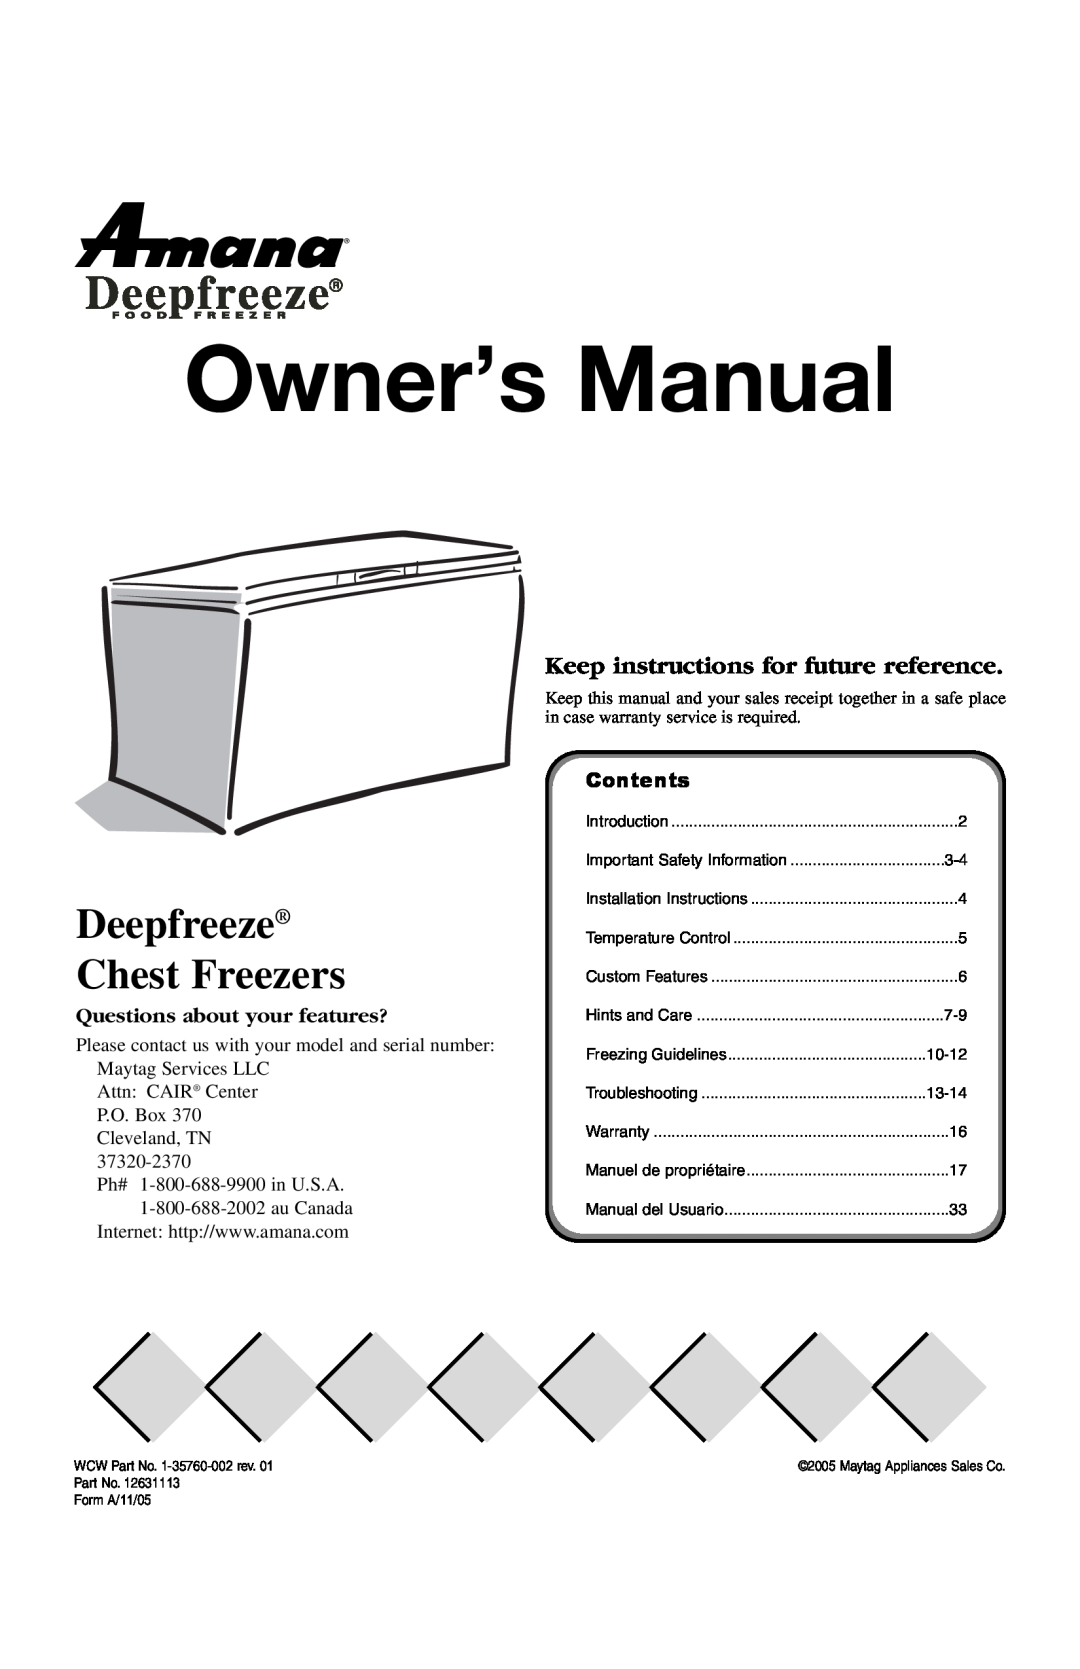 Amana owner manual Deepfreeze Chest Freezers, Keep instructions for future reference, Questions about your features? 